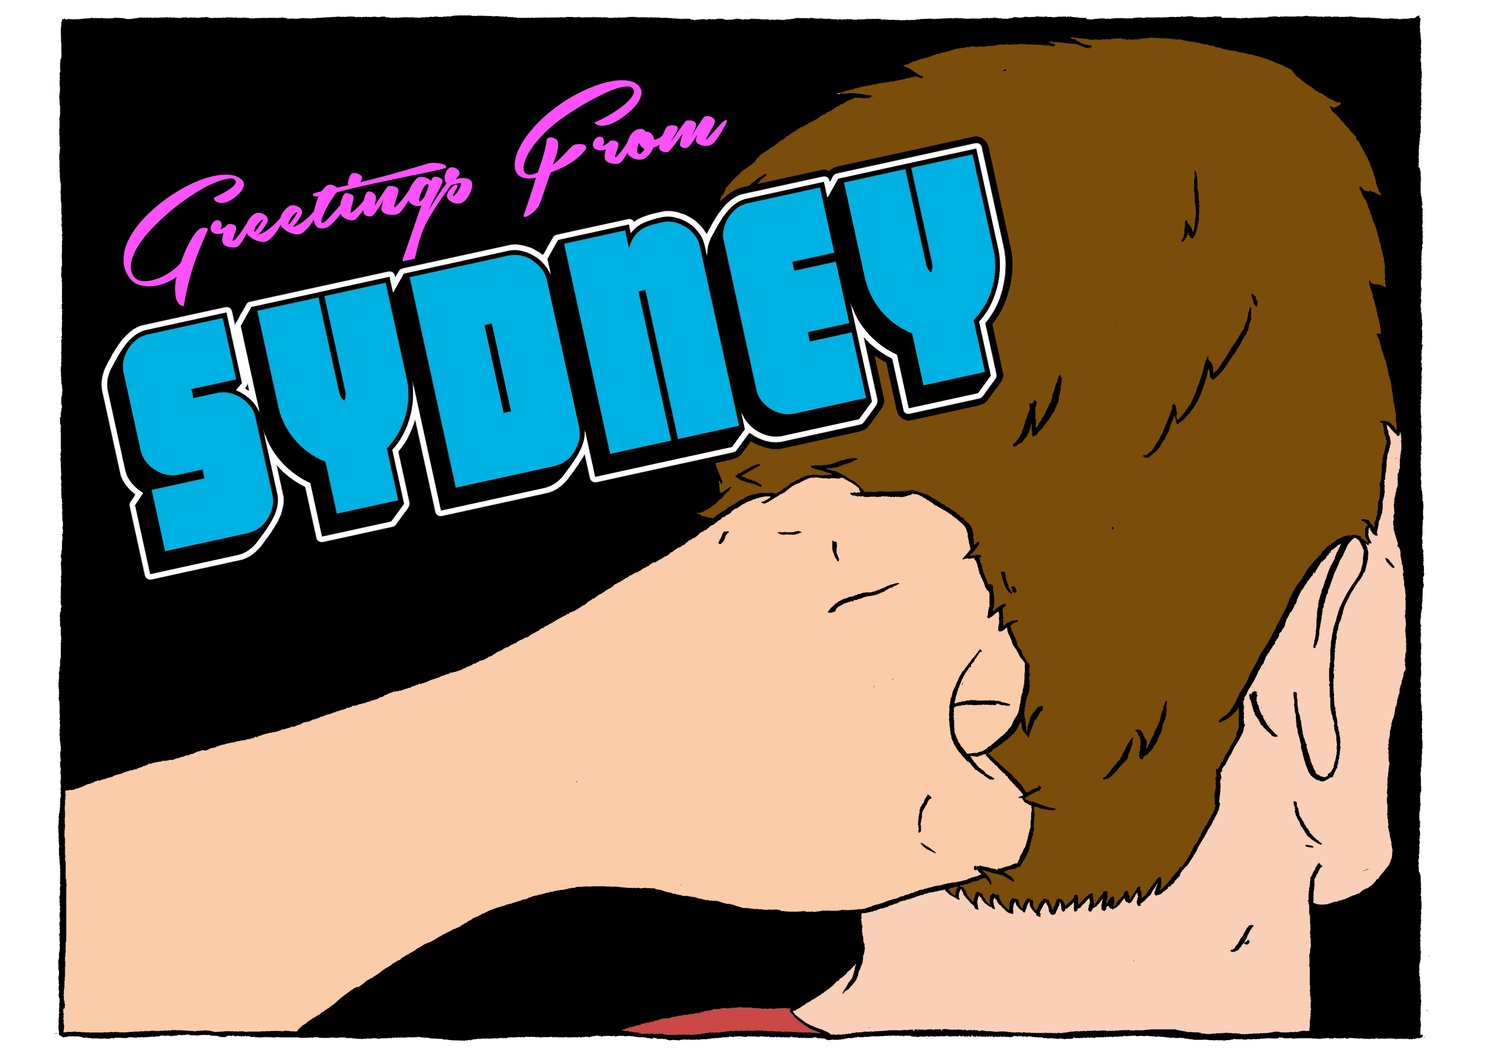 Greetings From Sydney A3 Print